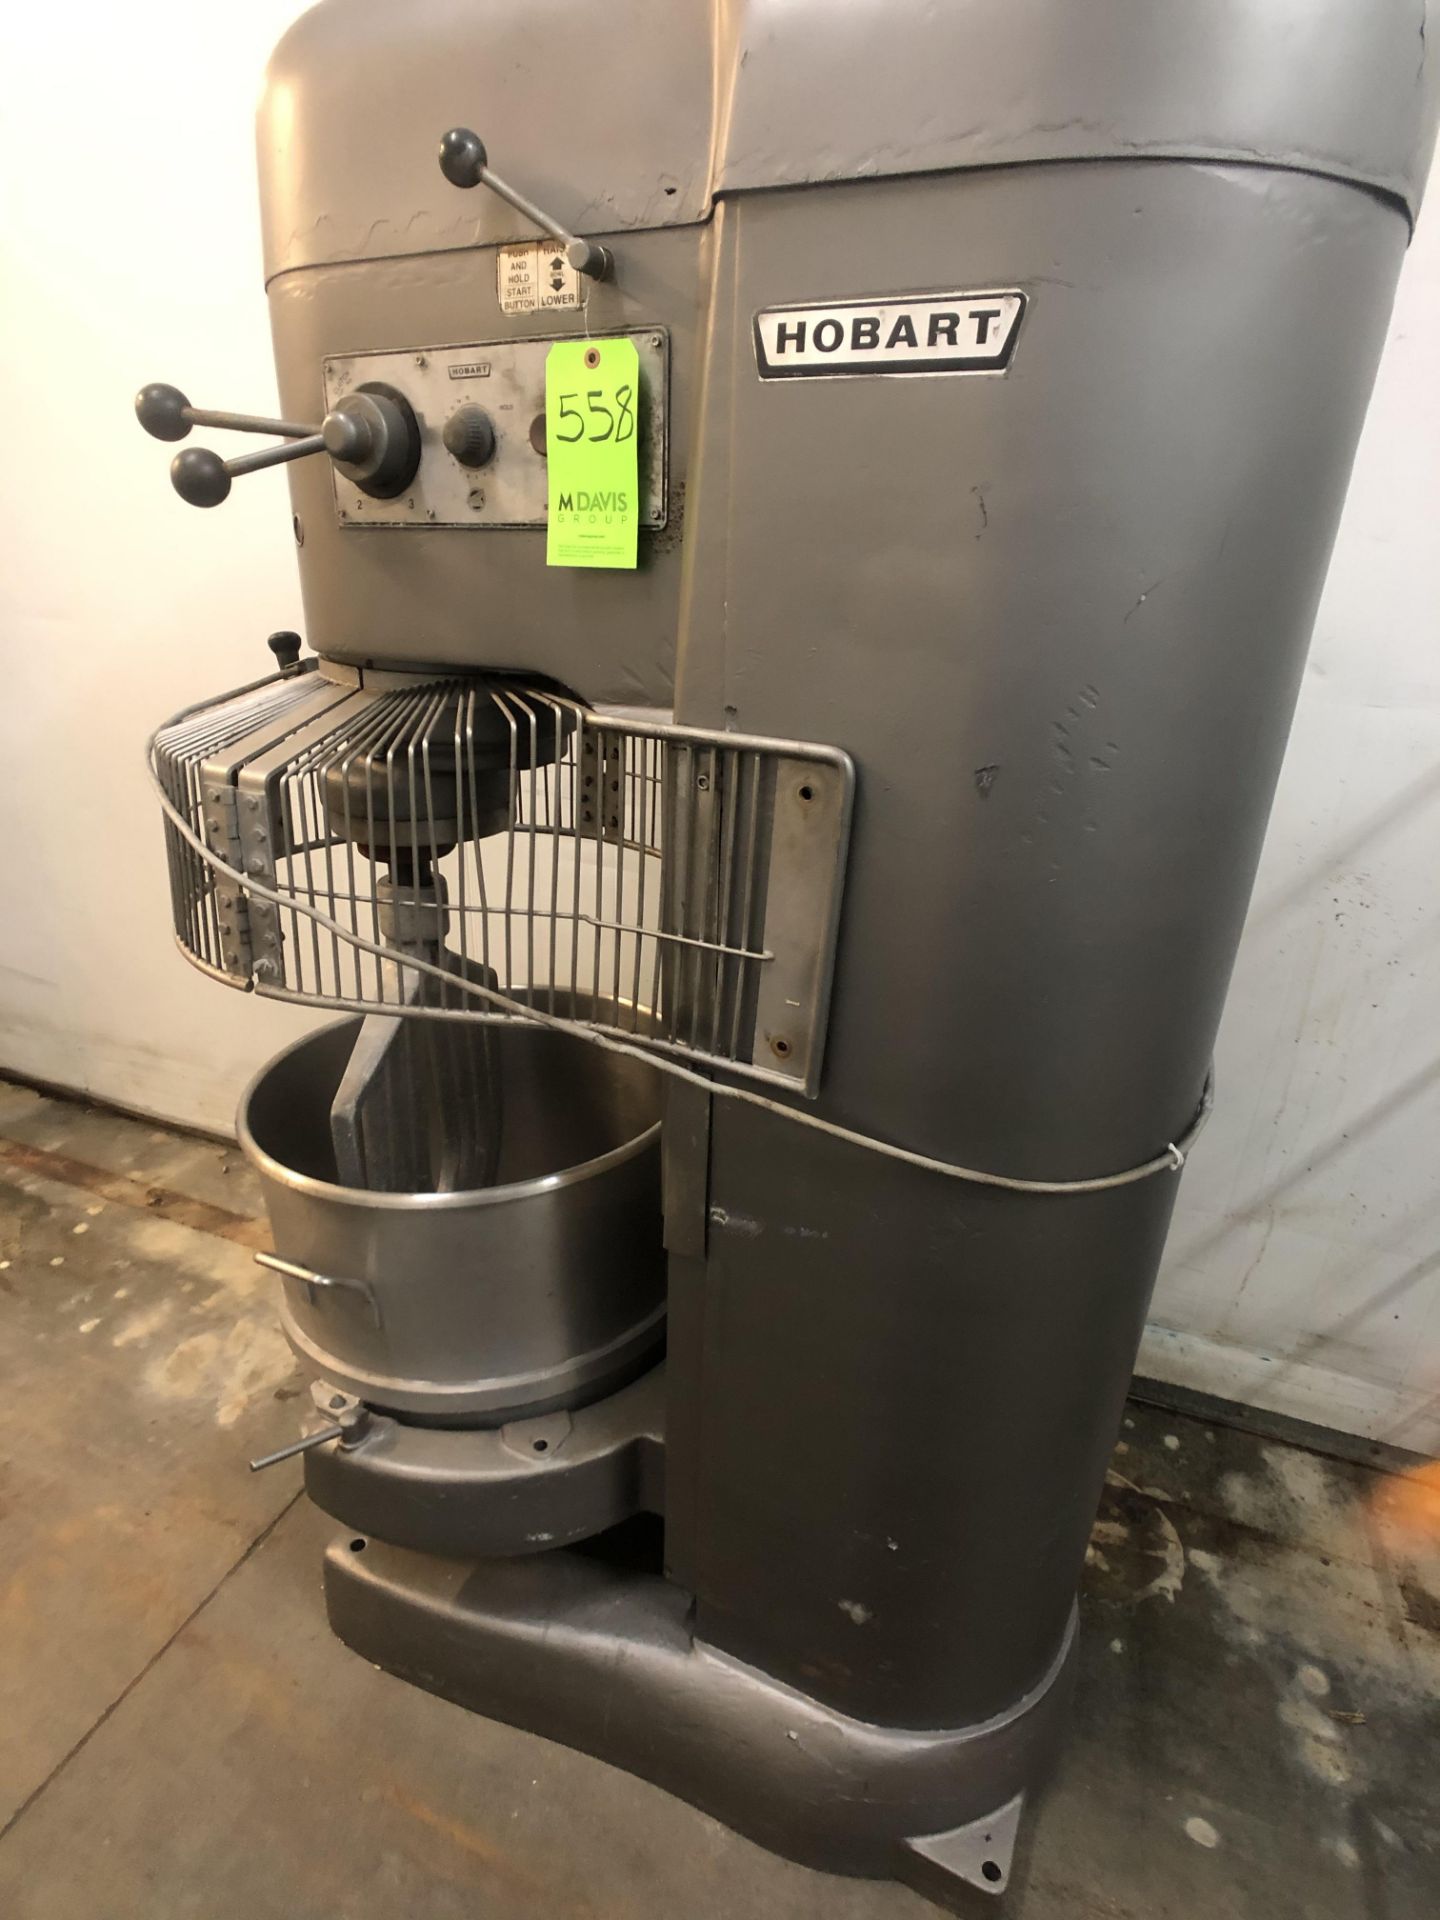 HOBART MIXER MODEL V1401 W/ BOWL 140 Qt. AND BEATER ATTACHMENT - Image 6 of 8